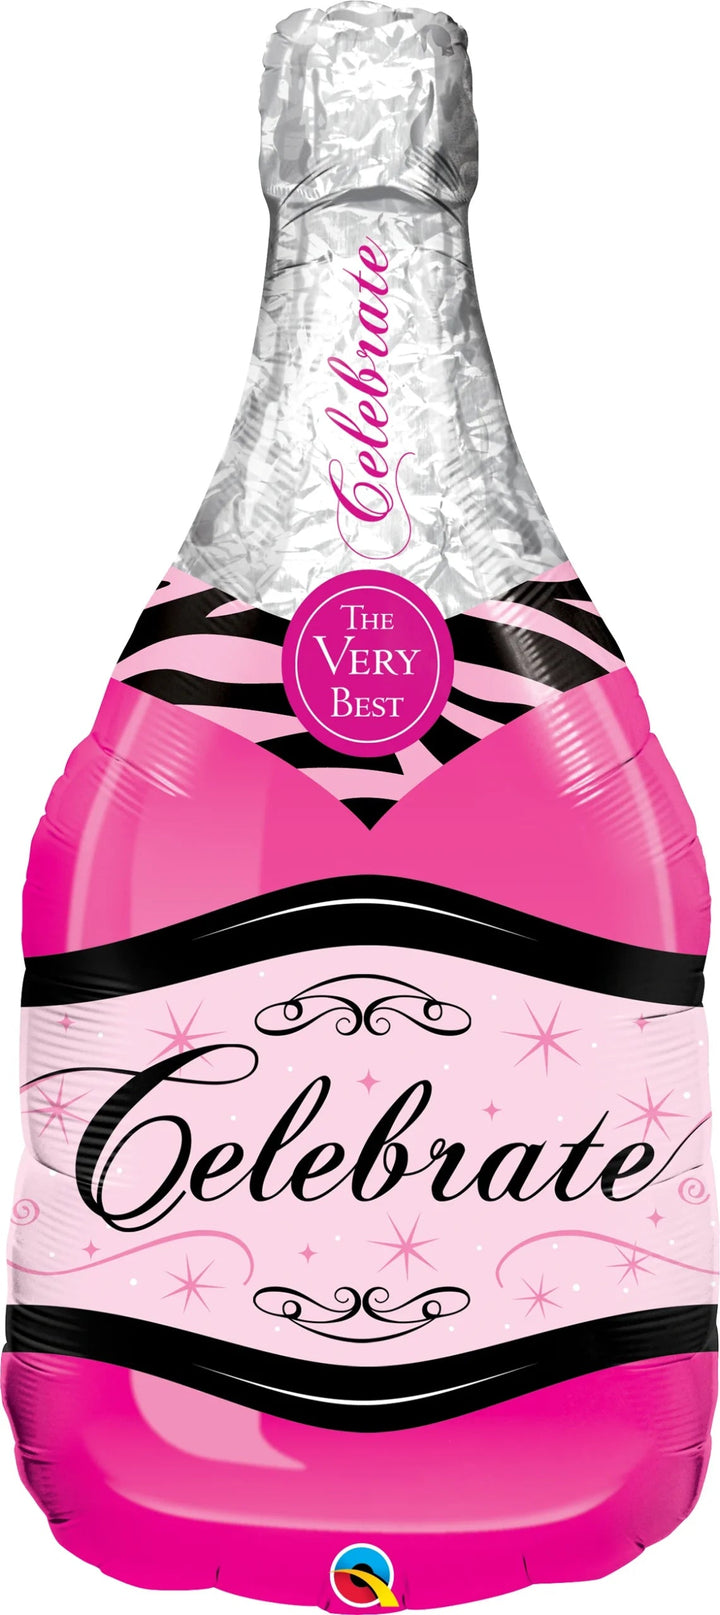 Foil Balloon Pink Bottle Bubbly Celebration 39inch - balloonsplaceusa